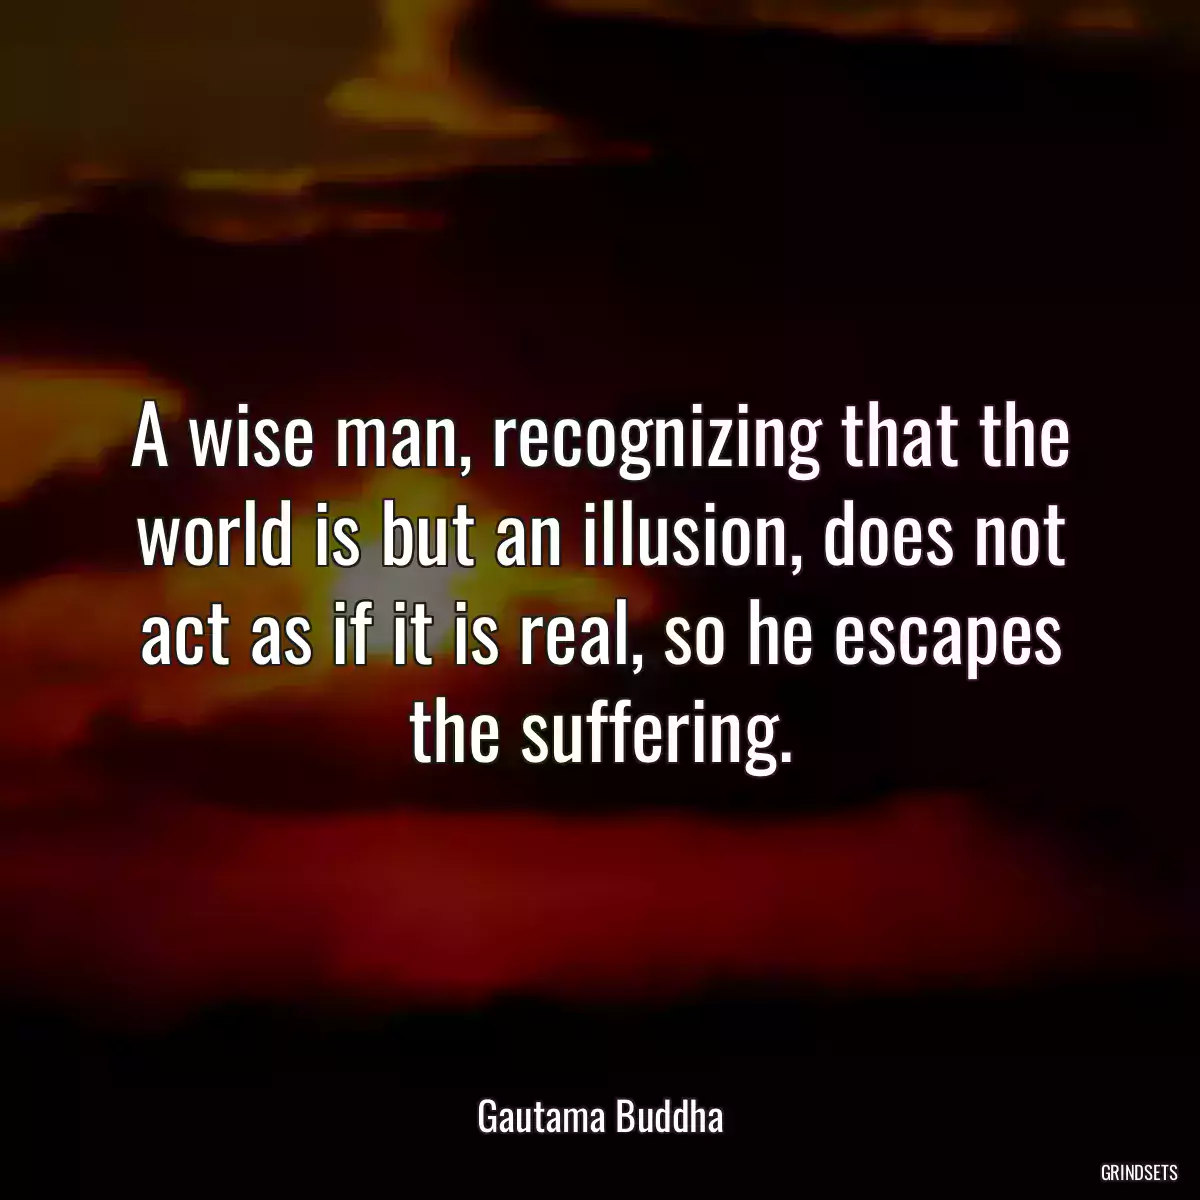 A wise man, recognizing that the world is but an illusion, does not act as if it is real, so he escapes the suffering.